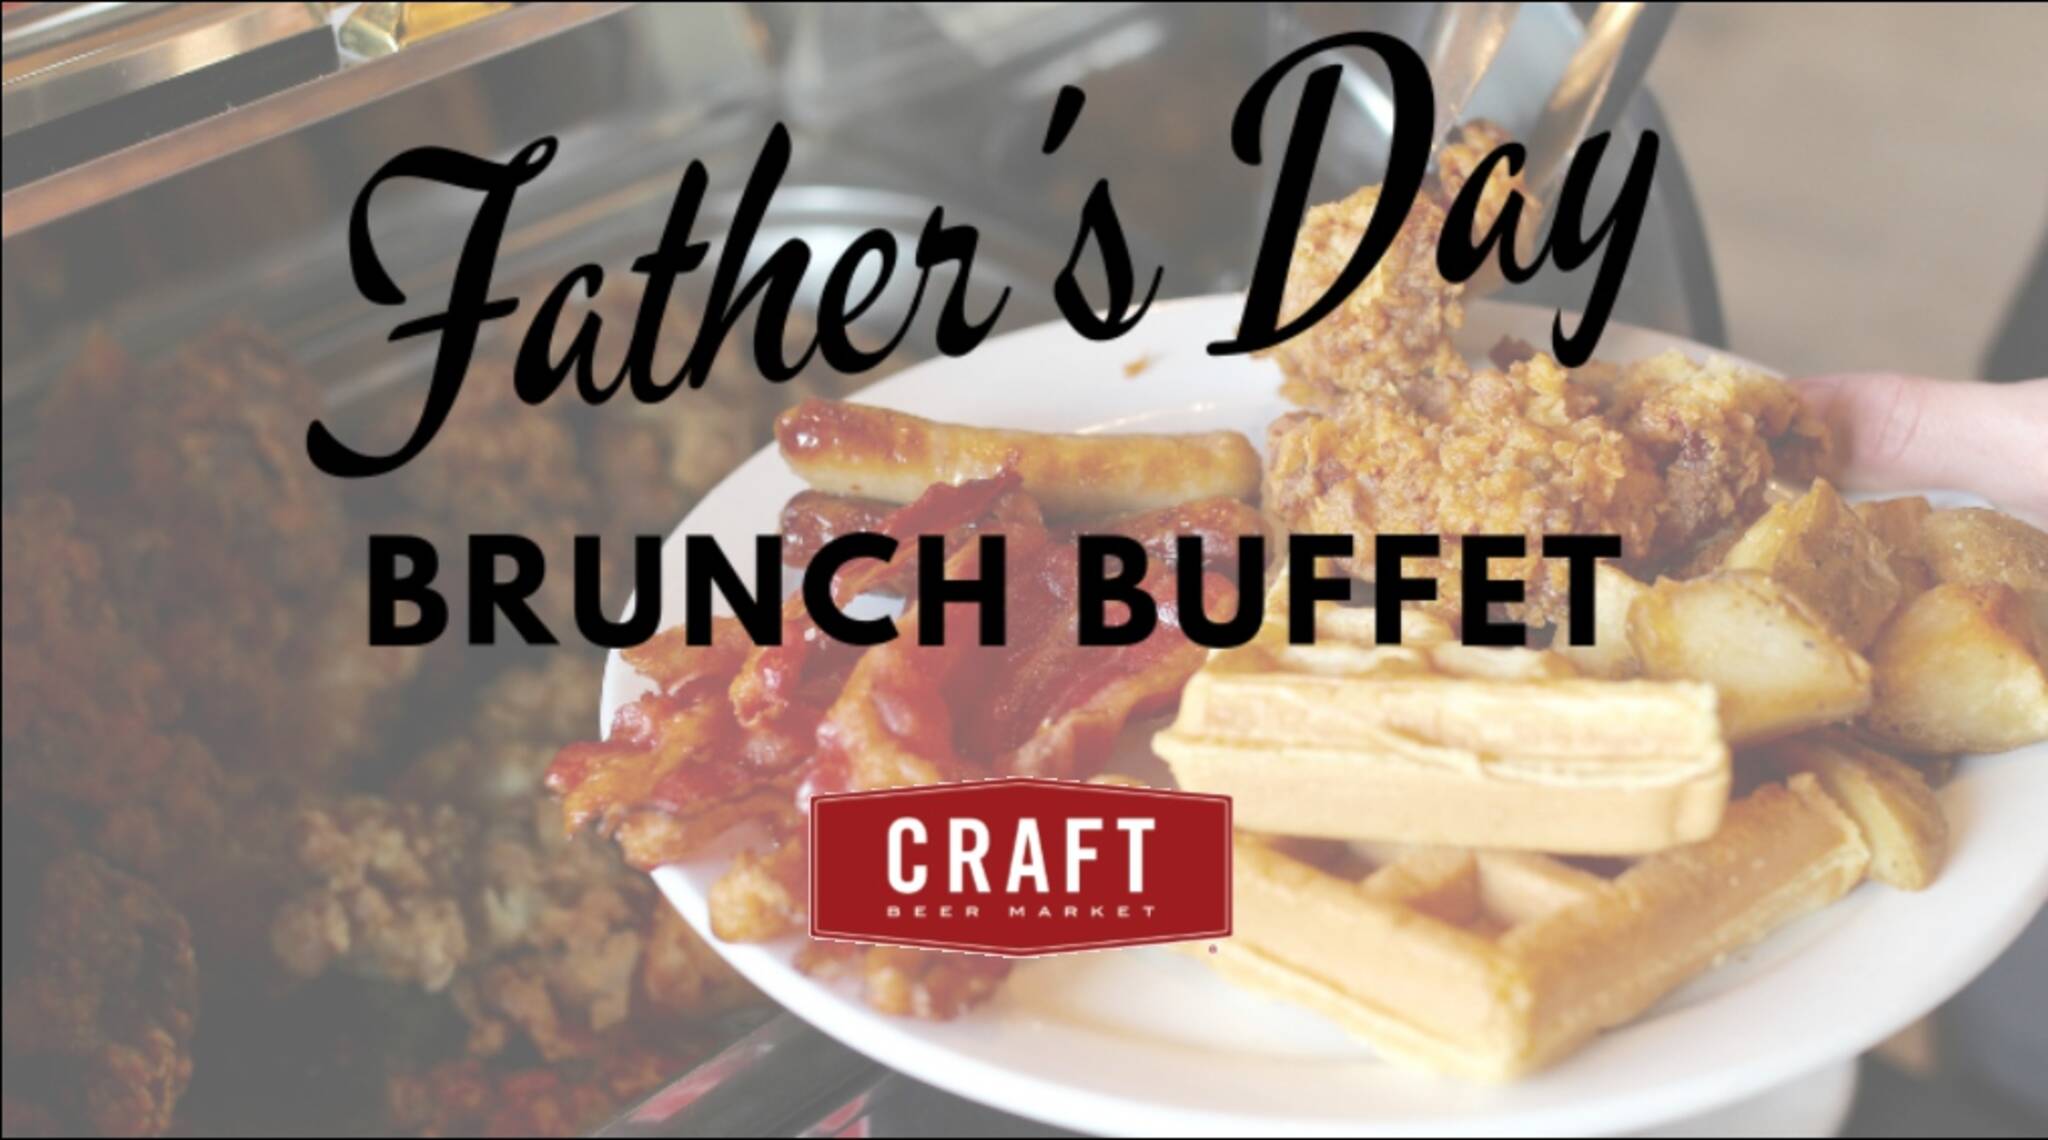 CRAFT Father's Day Brunch Buffet